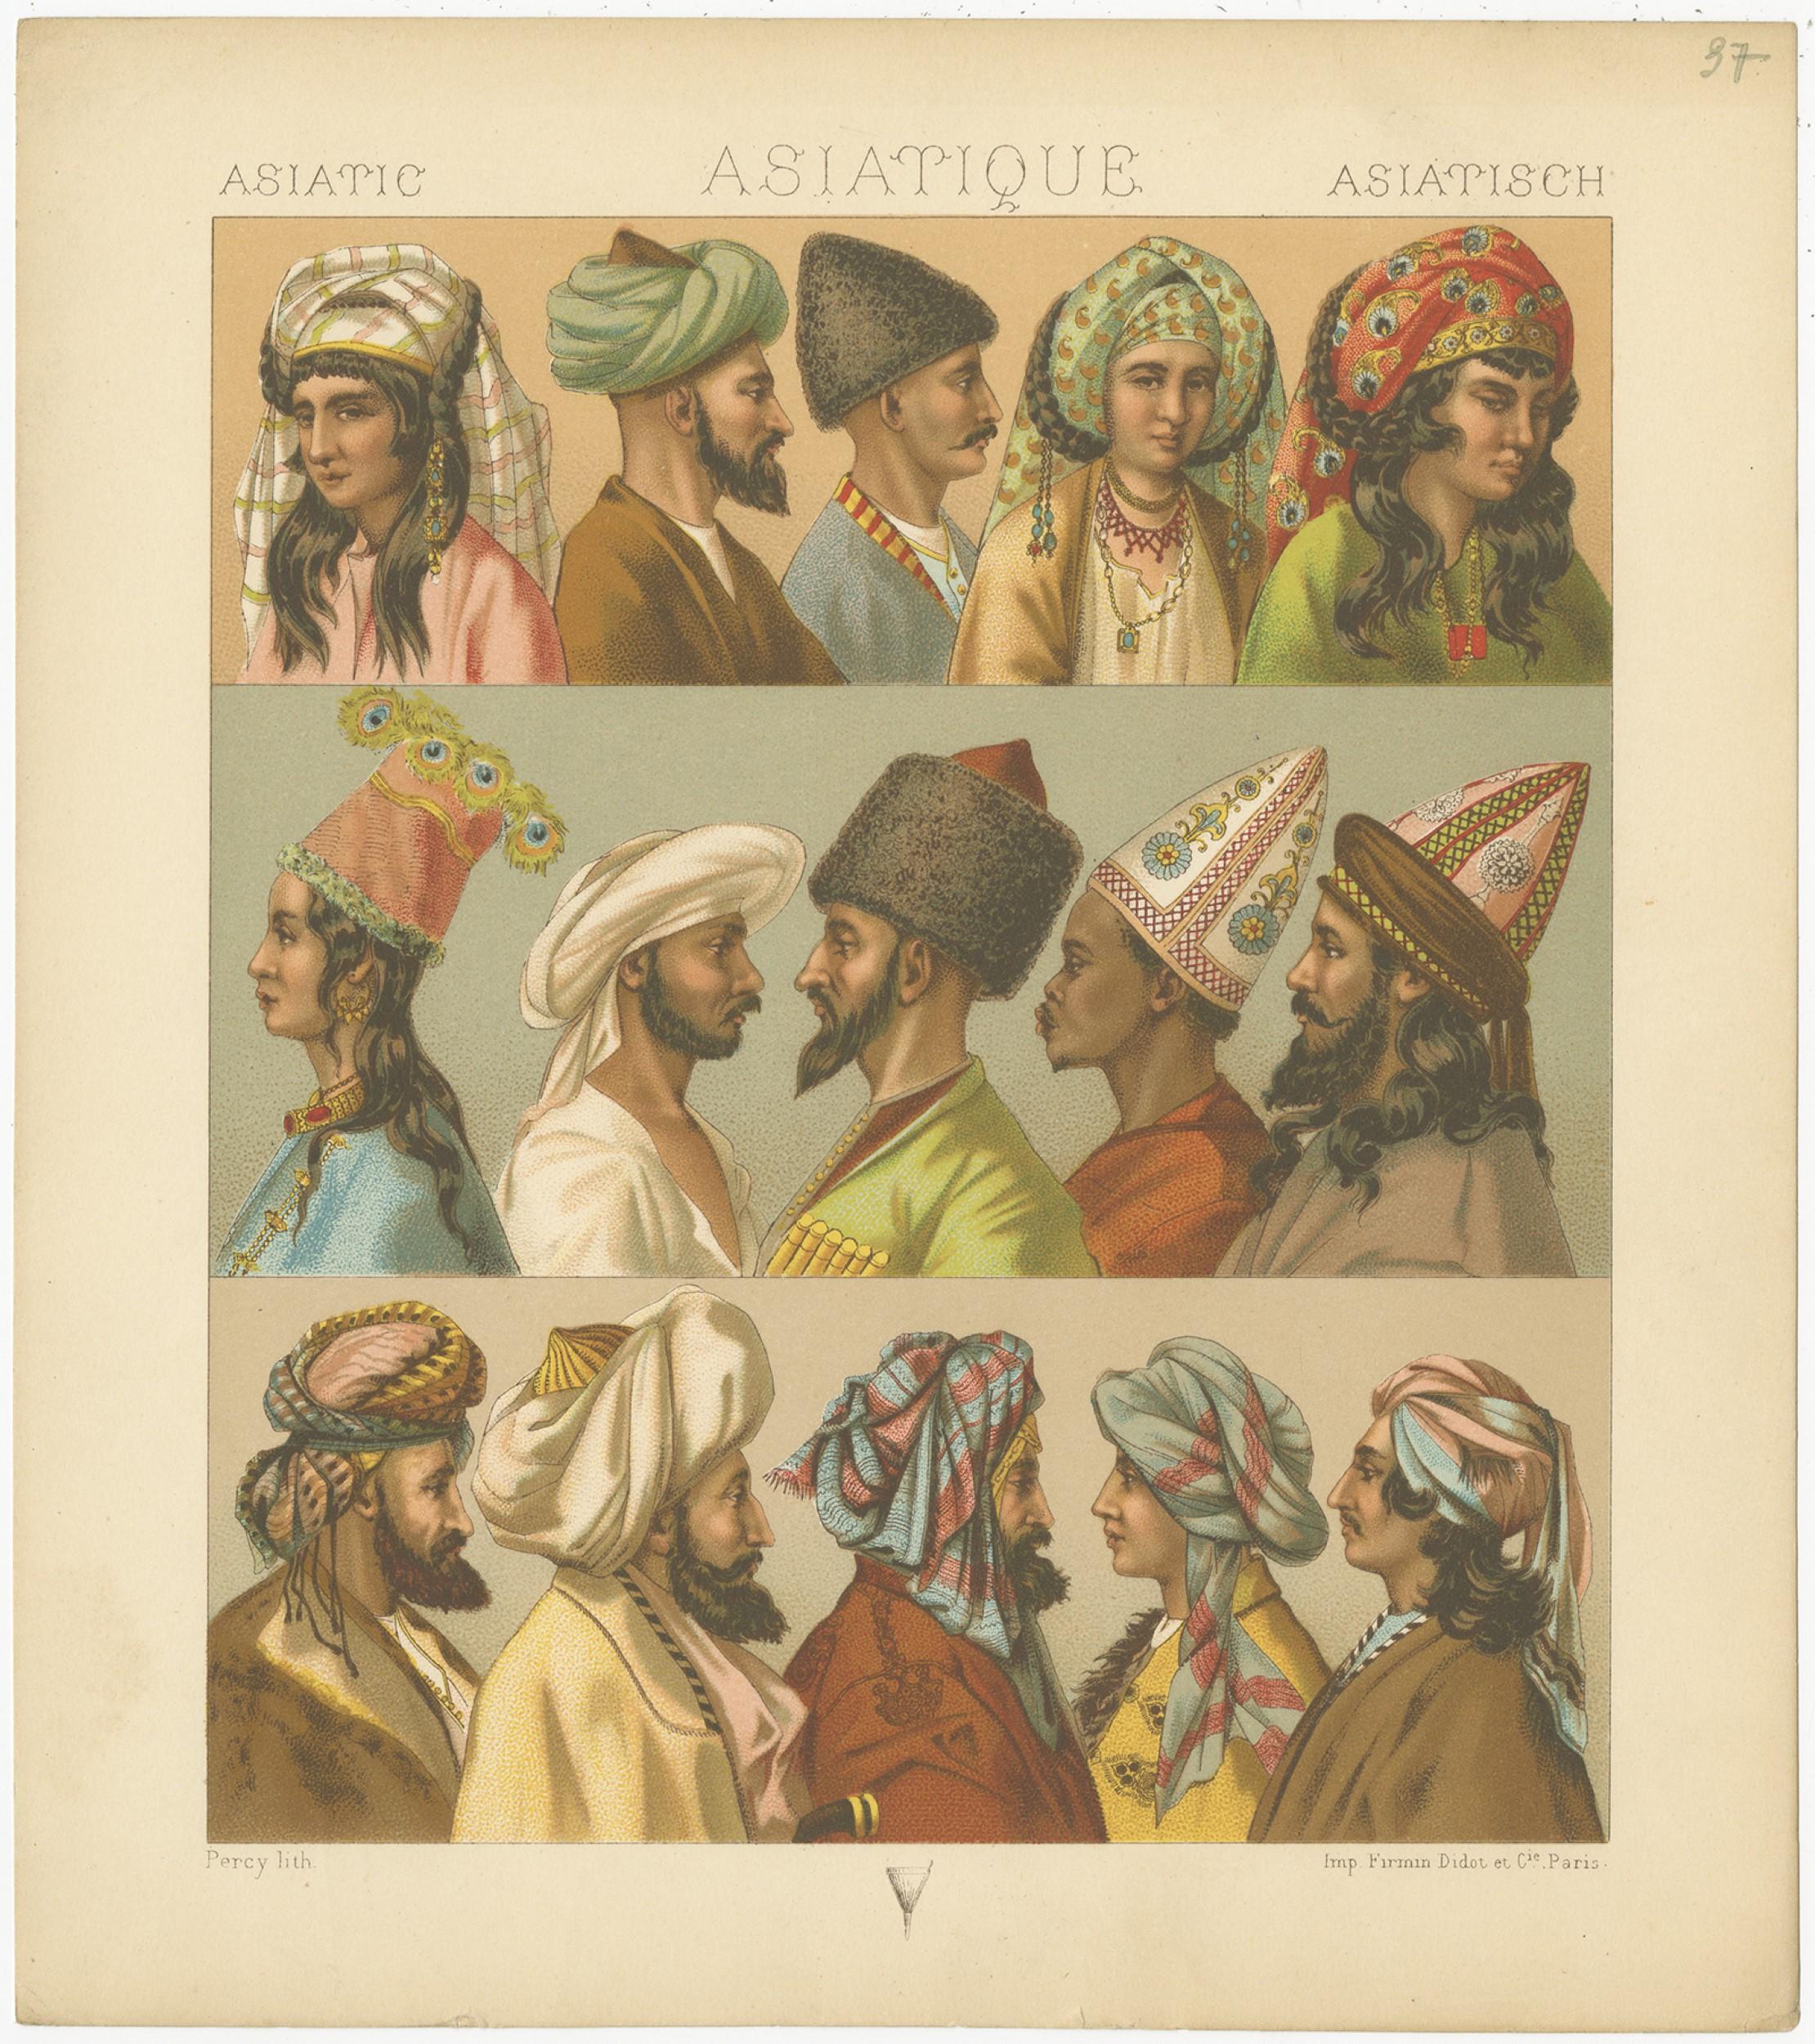 Antique print titled 'Asiatic - Asiatique - Asiatisch'. Chromolithograph of Asiatic headwear. This print originates from 'Le Costume Historique' by M.A. Racinet. Published, circa 1880.